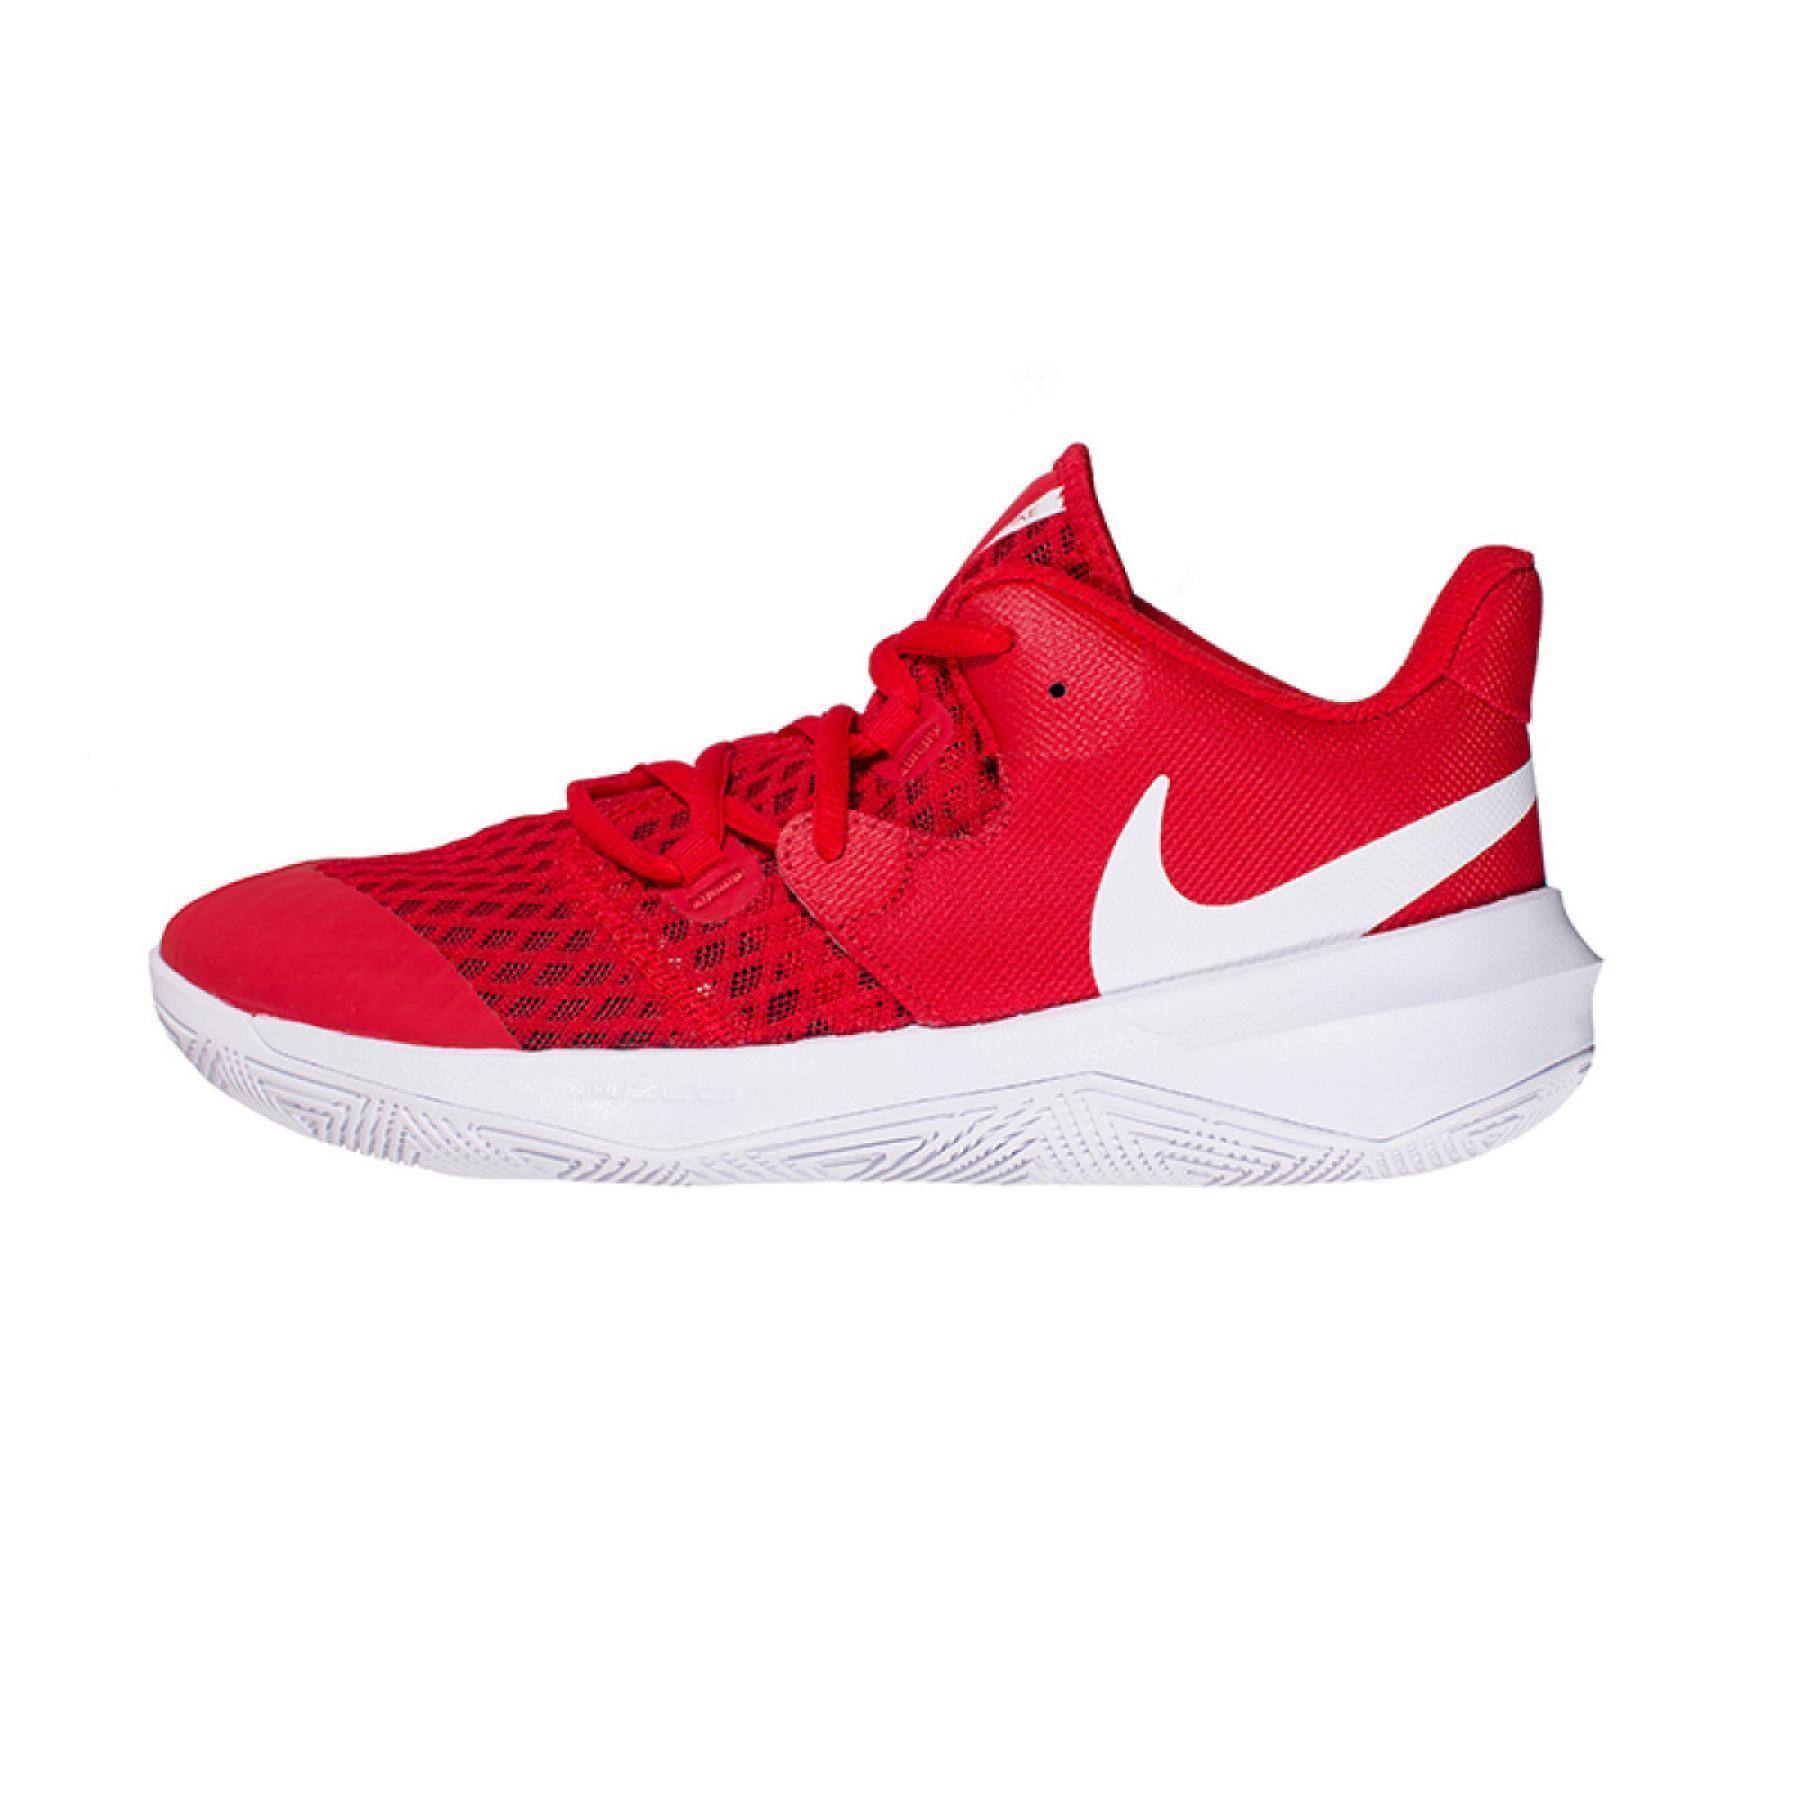 Shoes Nike Hyperspeed Court - Nike - Other Brands - Shoes